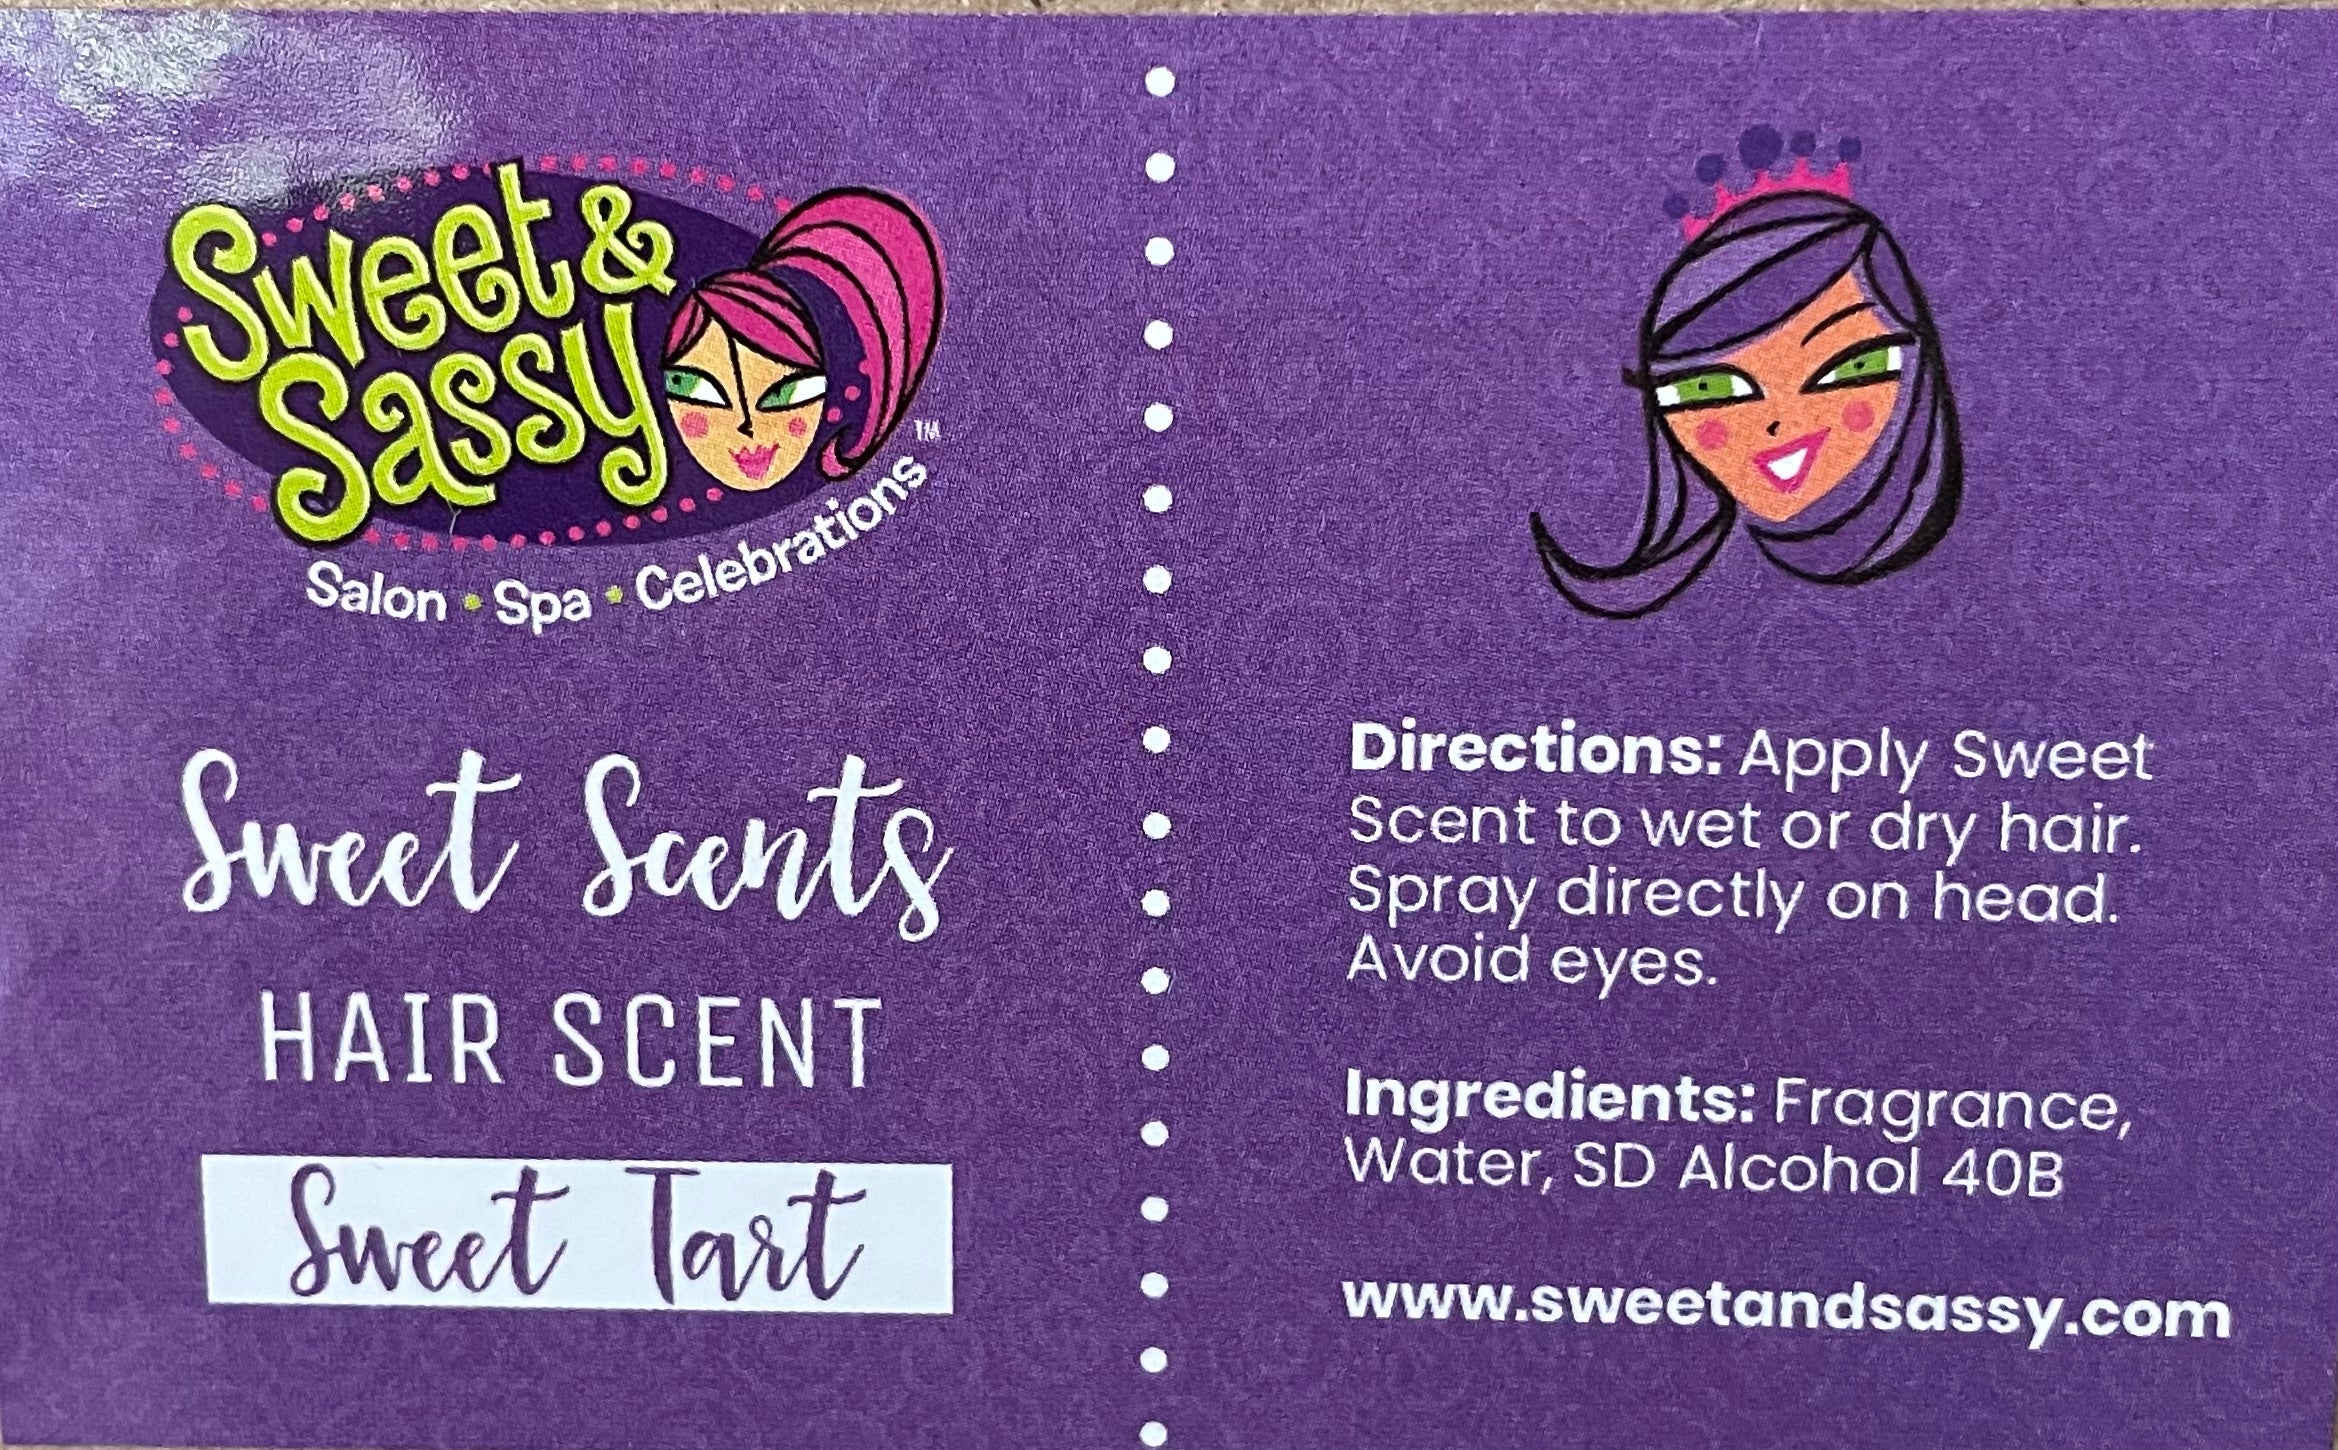 Sweet Scents